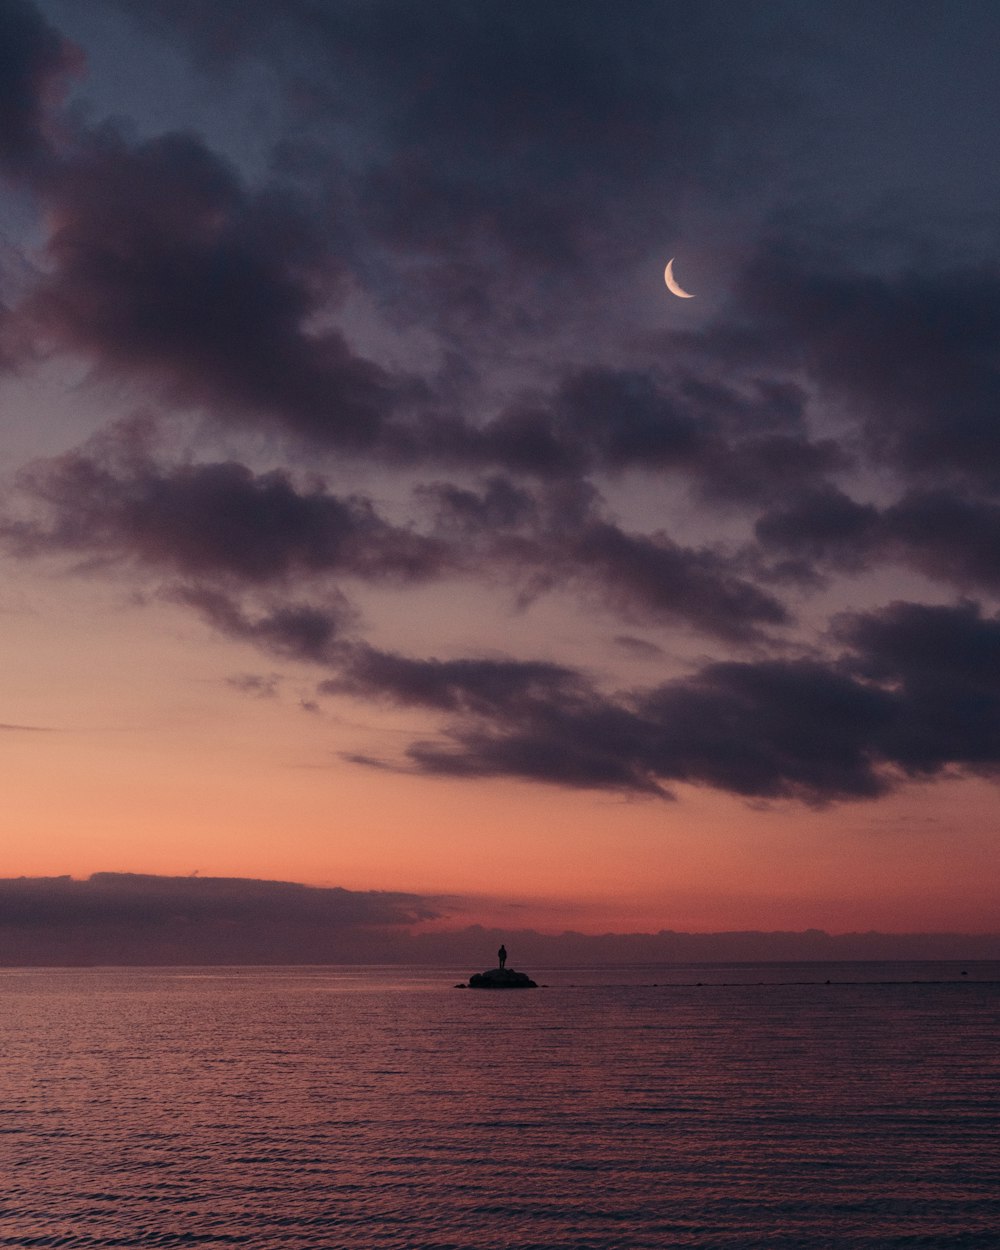 a boat in the ocean at sunset with a half moon in the sky